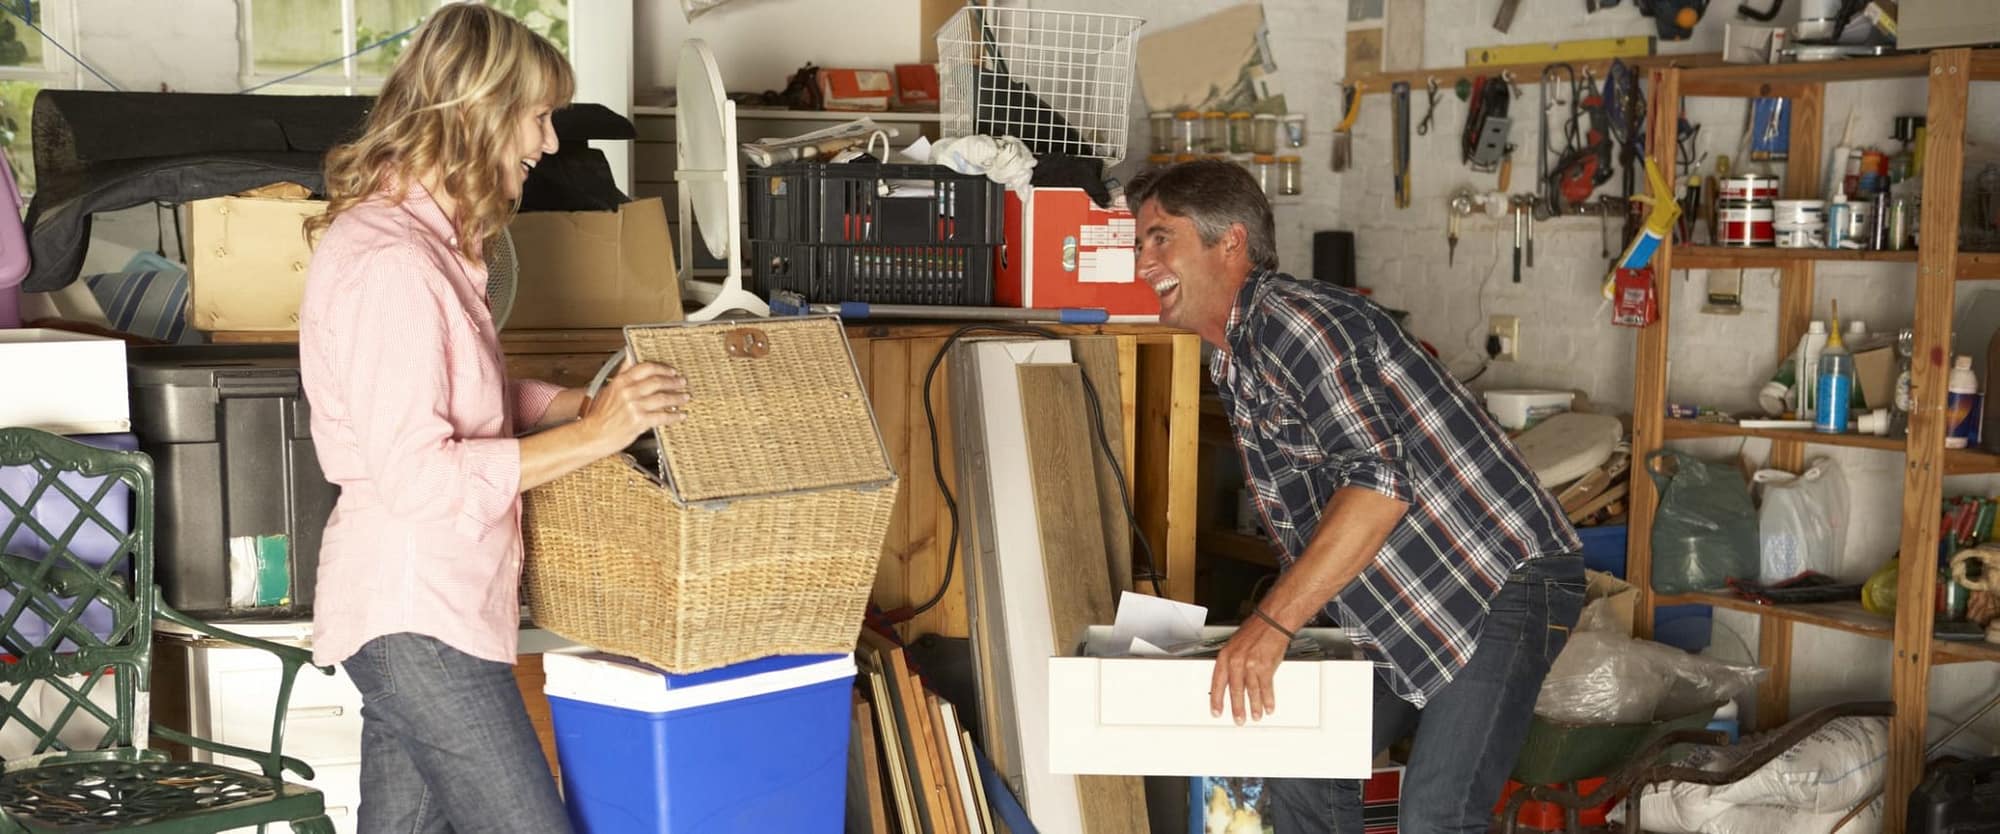 Happy Man and Woman Storing Objects in Garage